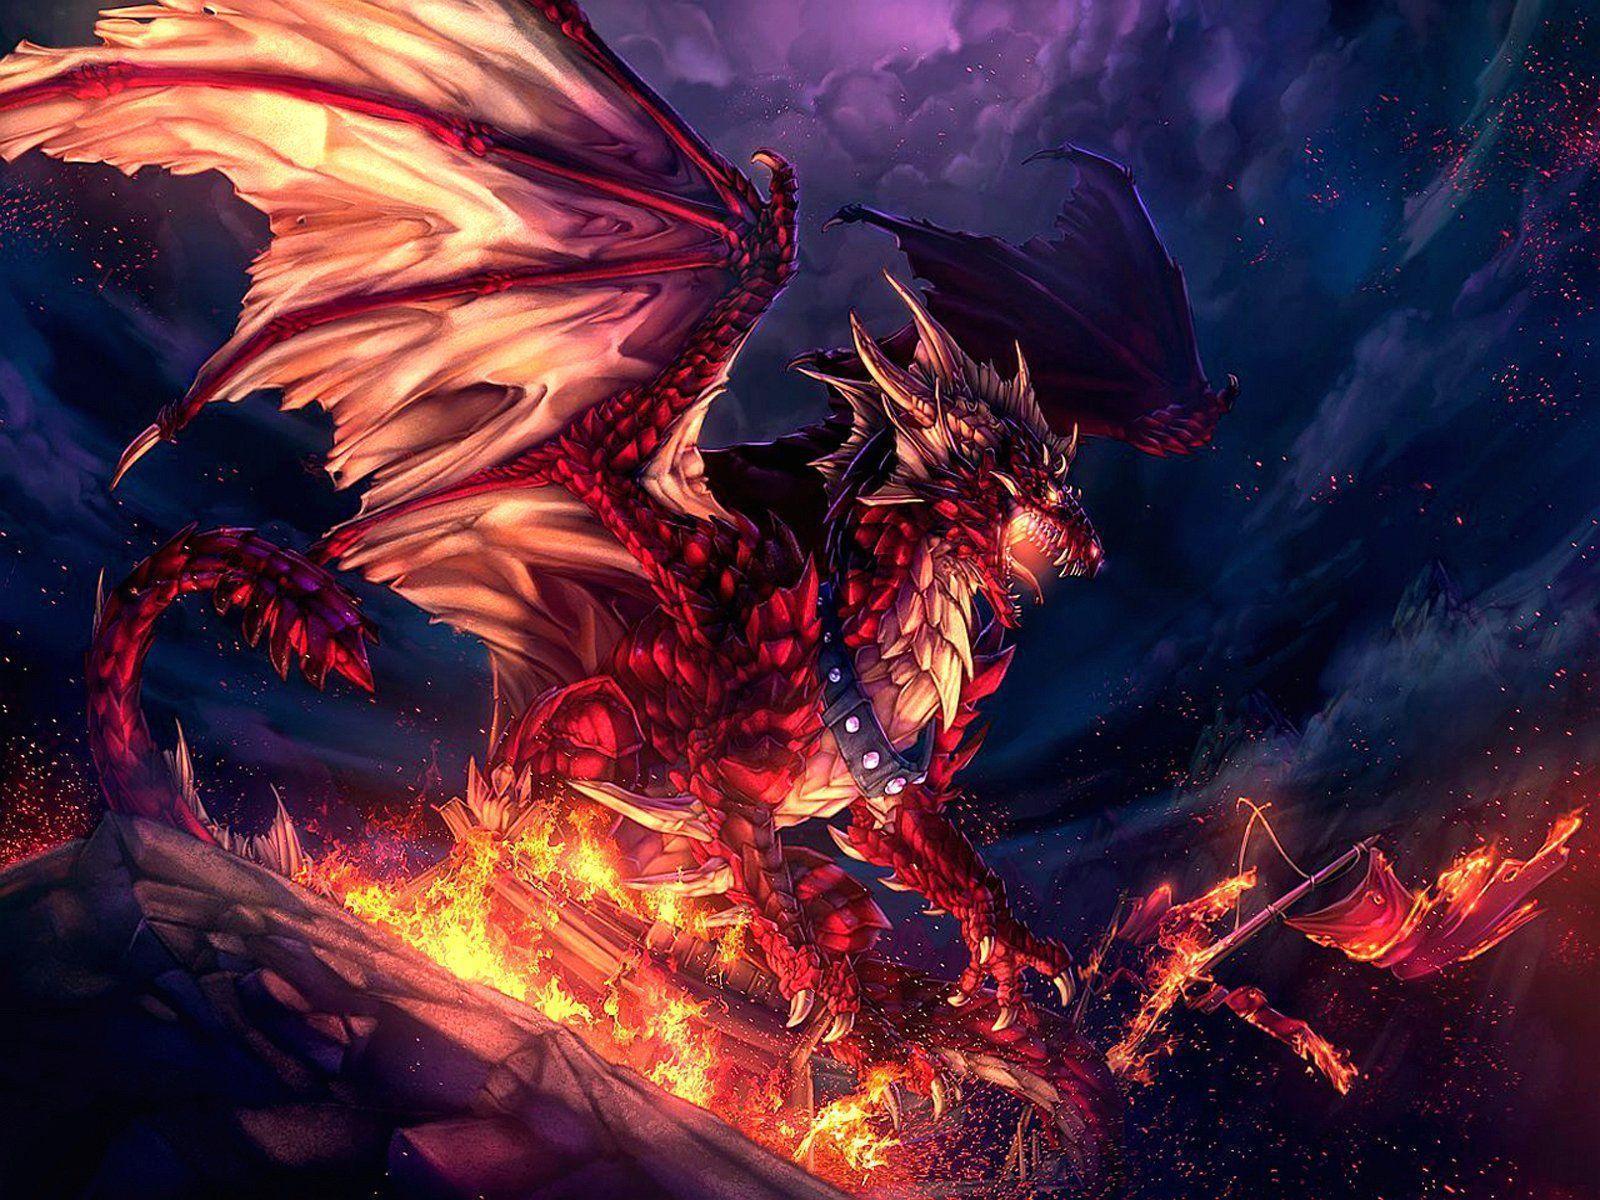 1600 x 1200 · jpeg - Red Dragon Wallpapers - Wallpaper Cave